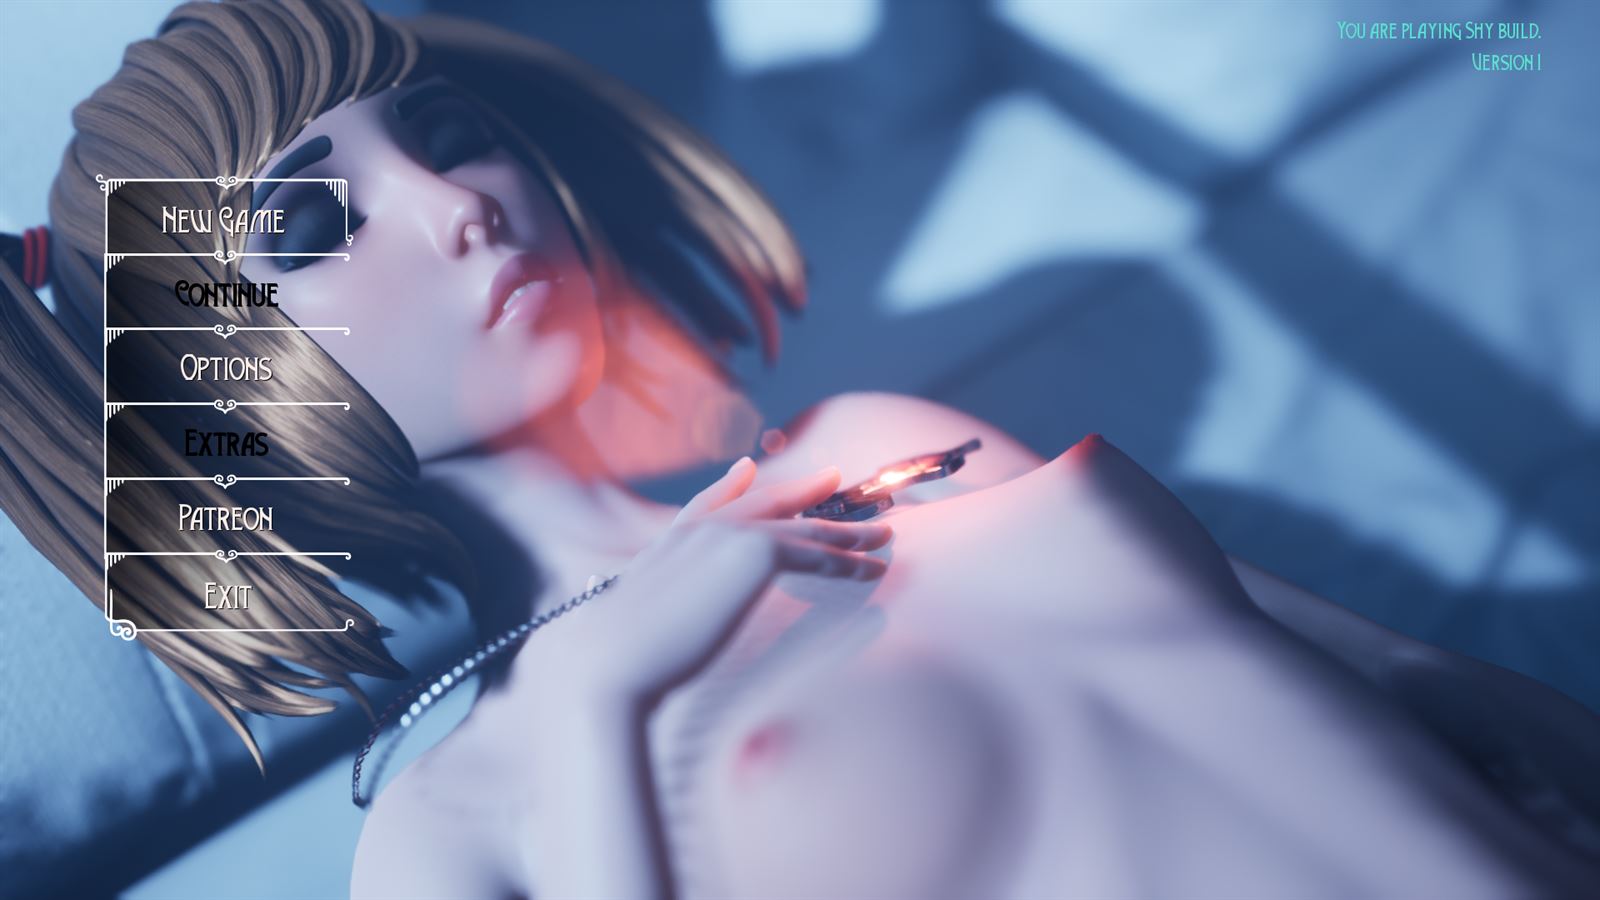 Wish Porn - My Lust Wish Unreal Engine Porn Sex Game v.0.8.5 Download for Windows